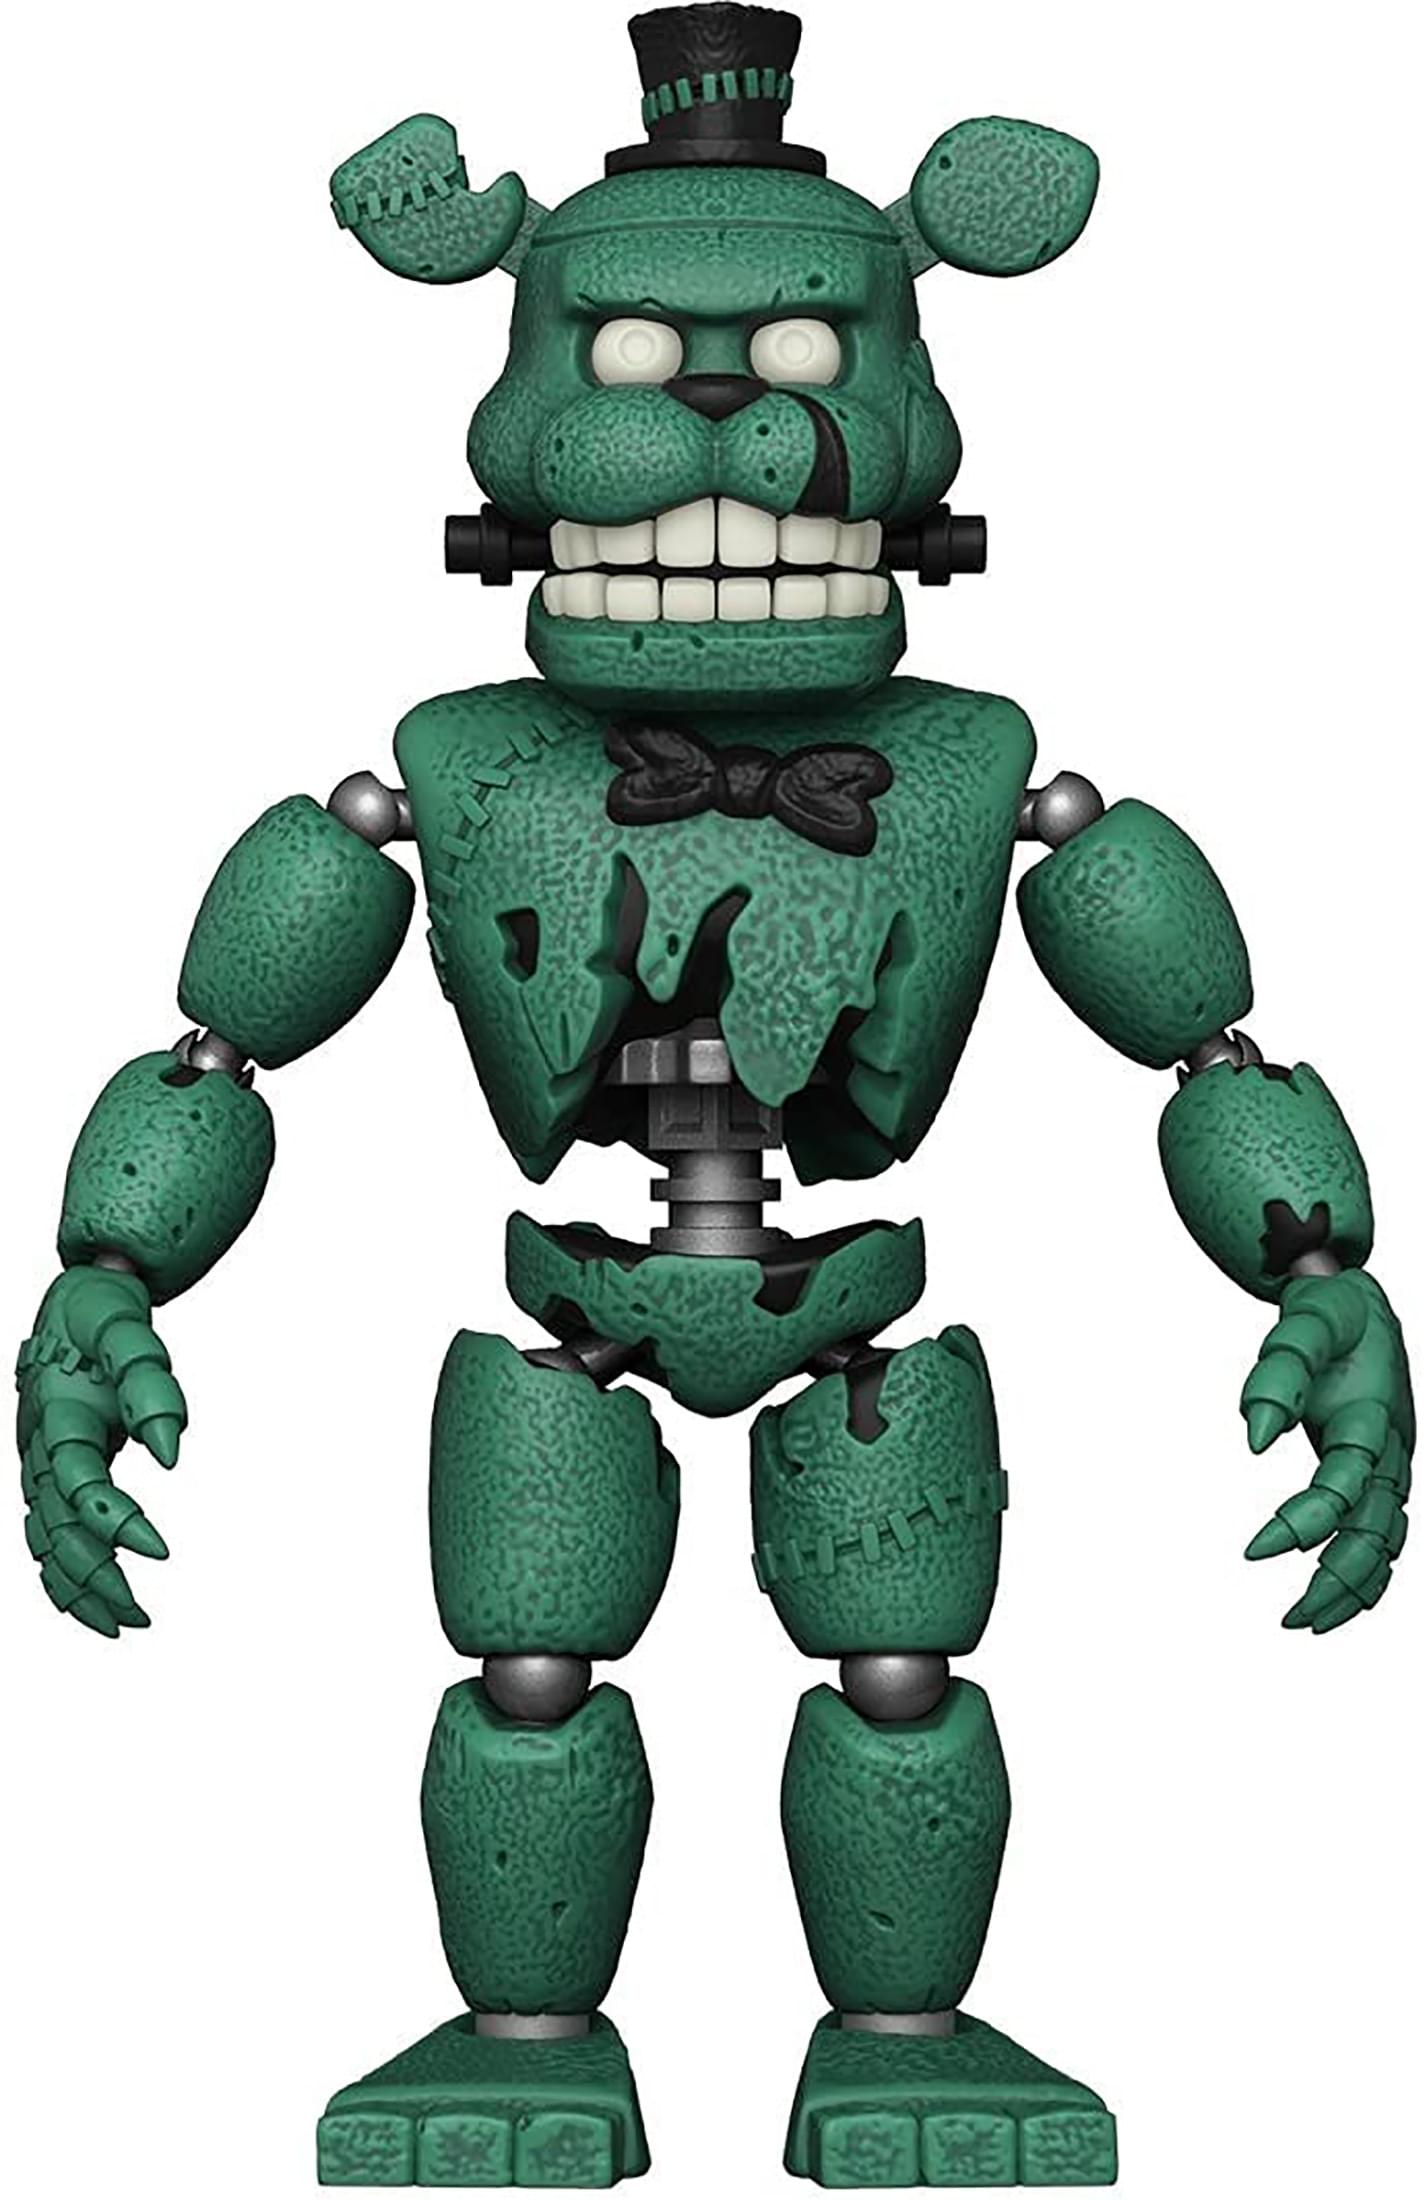 Five Nights at Freddy's 5 Action Figures